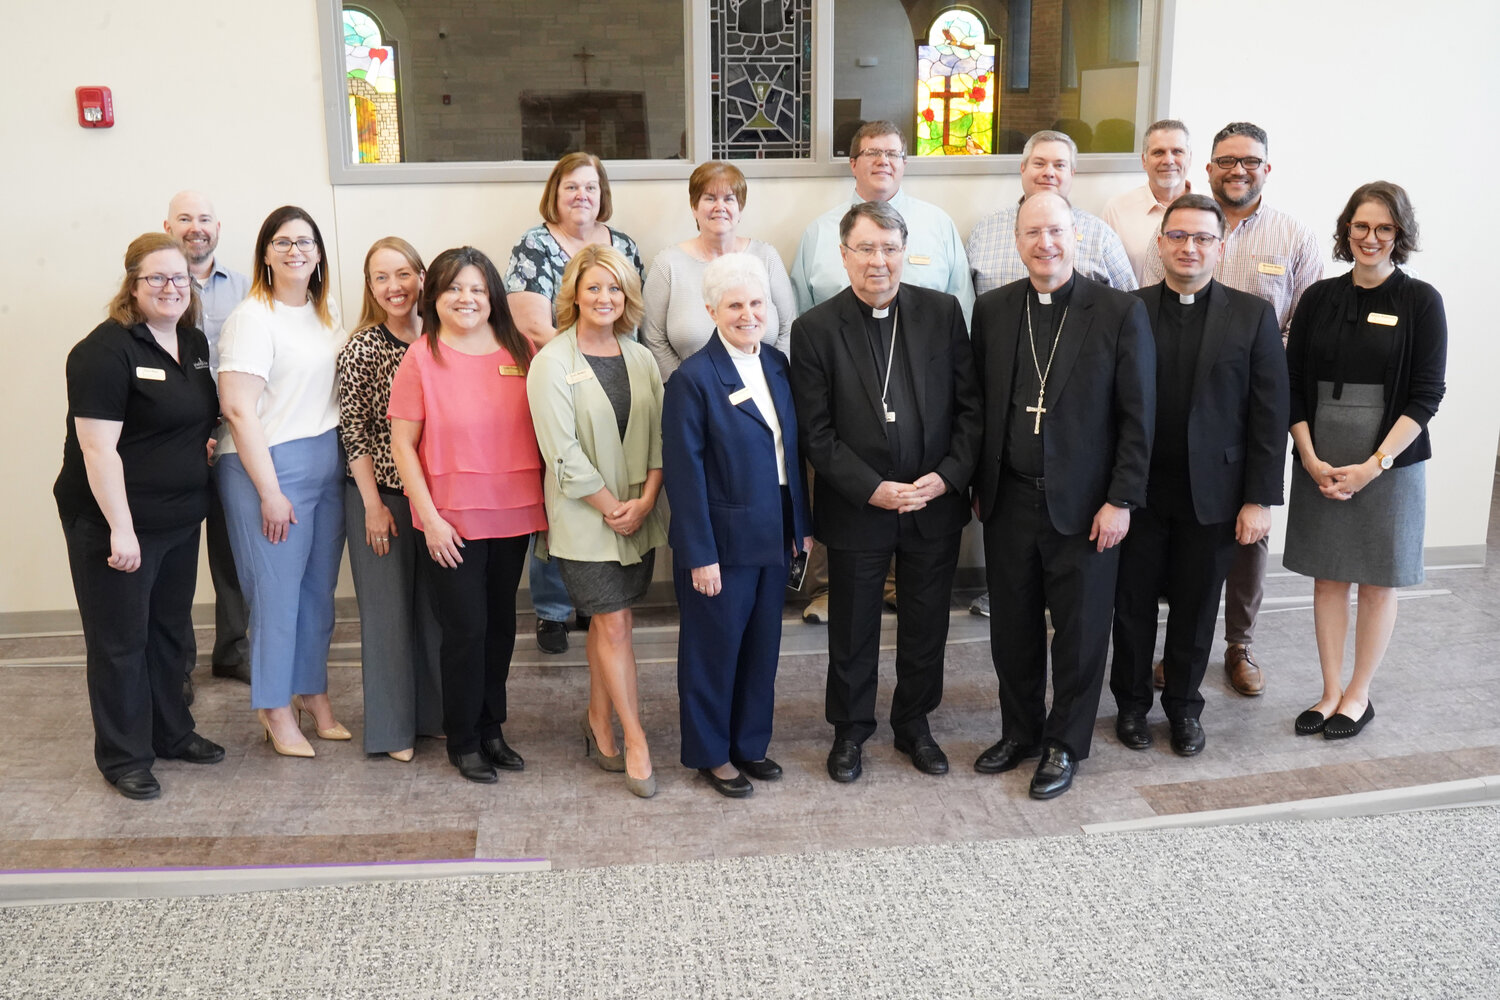 Archbishop Christophe Pierre, apostolic nuncio to the United States, joins Bishop W. Shawn McKnight, Sister Kathleen Wegman SSND, interim executive director, and members of the Catholic Charities of Central and Northern Missouri staff for a photo while touring the Catholic Charities Central Offices on May 4.